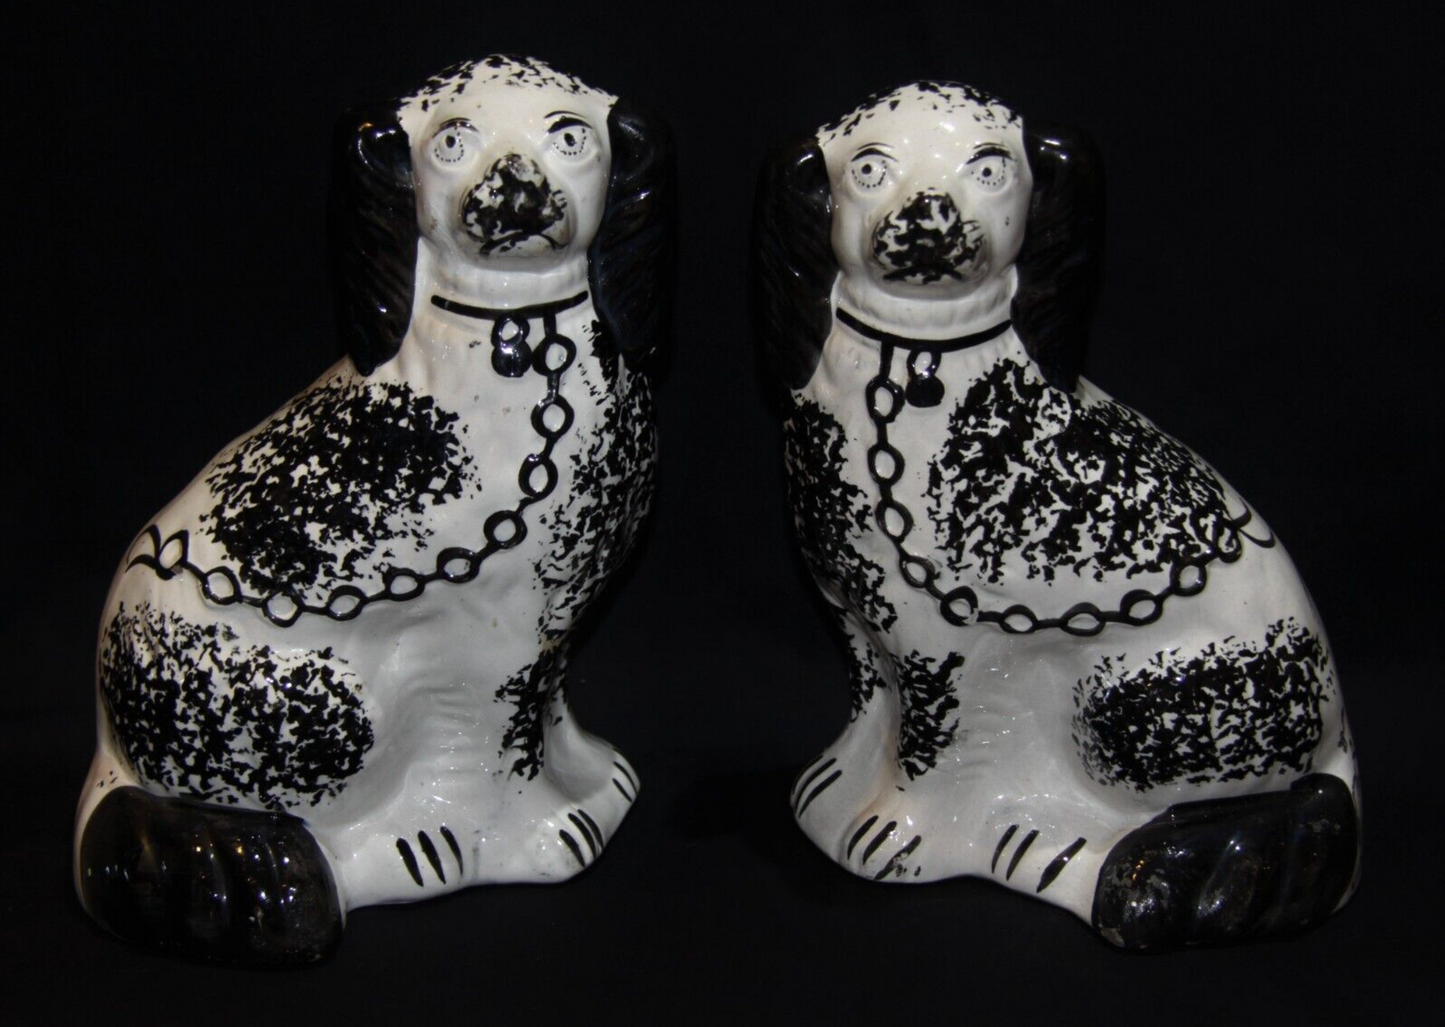 Pair of Antique Staffordshire Sponge Decorated Wally Dogs in Black & White